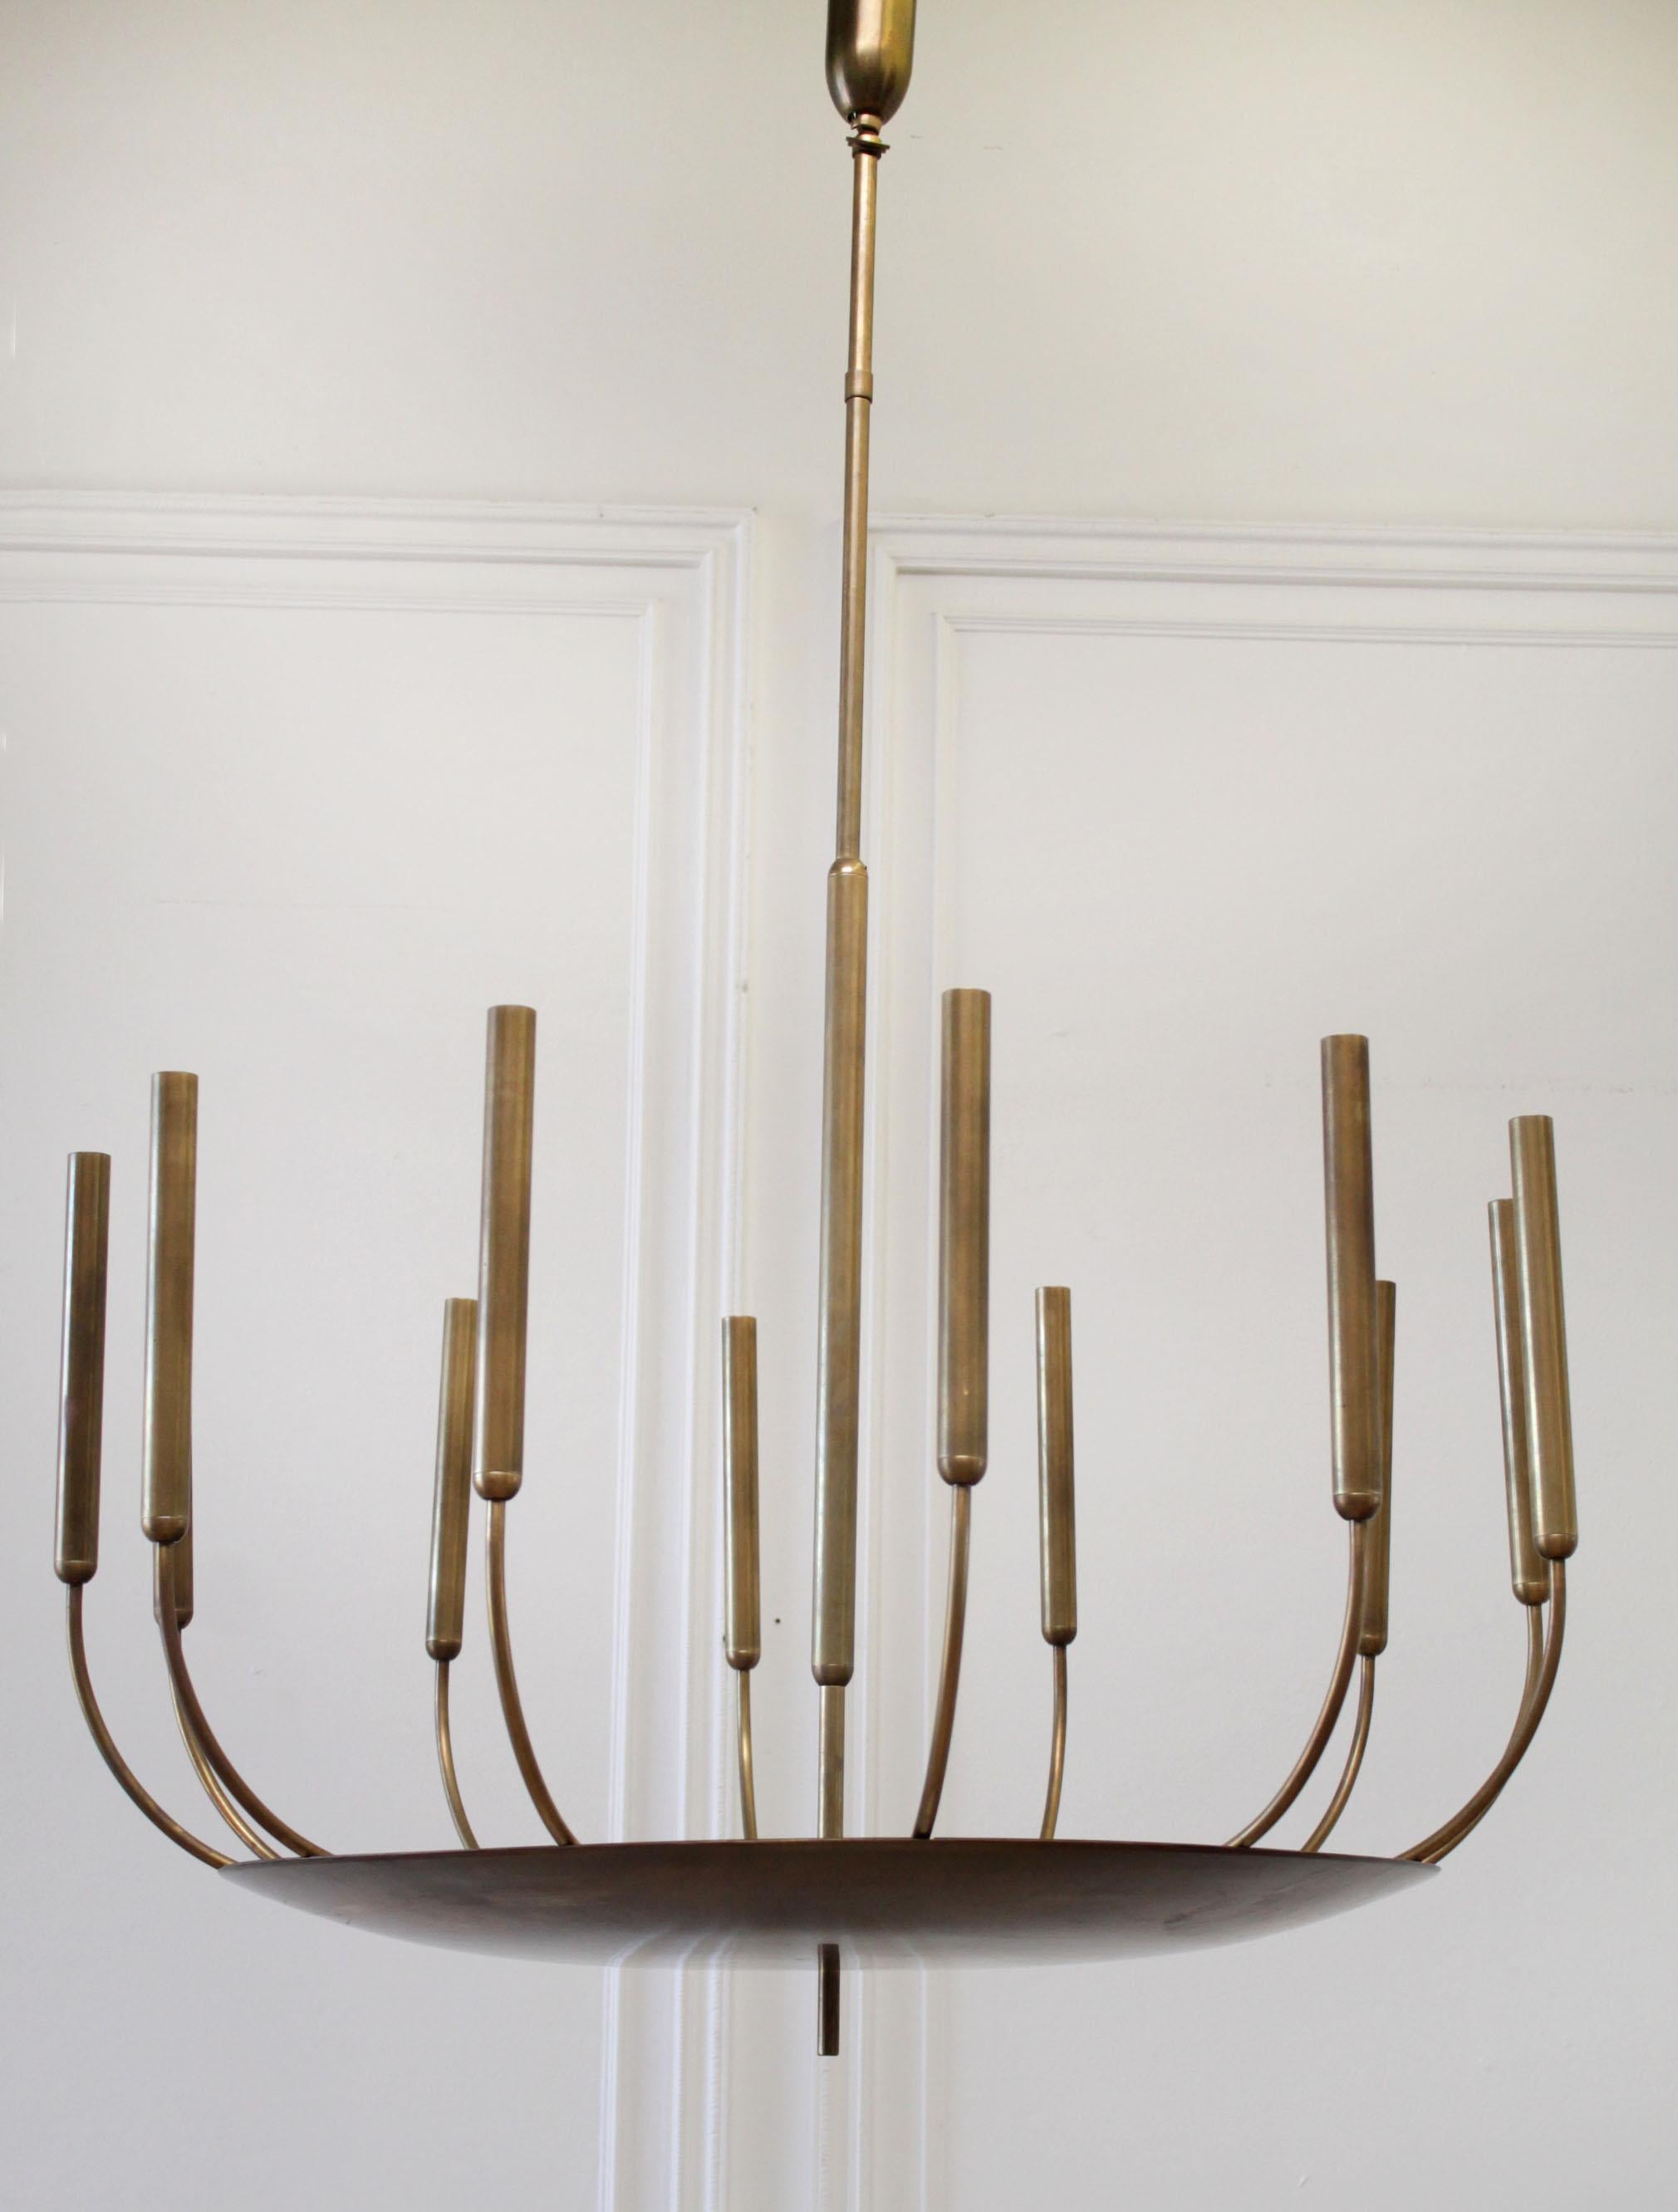 Created by renowned lighting designer Jonathan Browning, this fixture has the presence of modern sculpture. Midcentury in inspiration, delicate arms evoking organic forms culminate in Edison-style bulbs.
Crafted of solid brass
Lacquered burnished